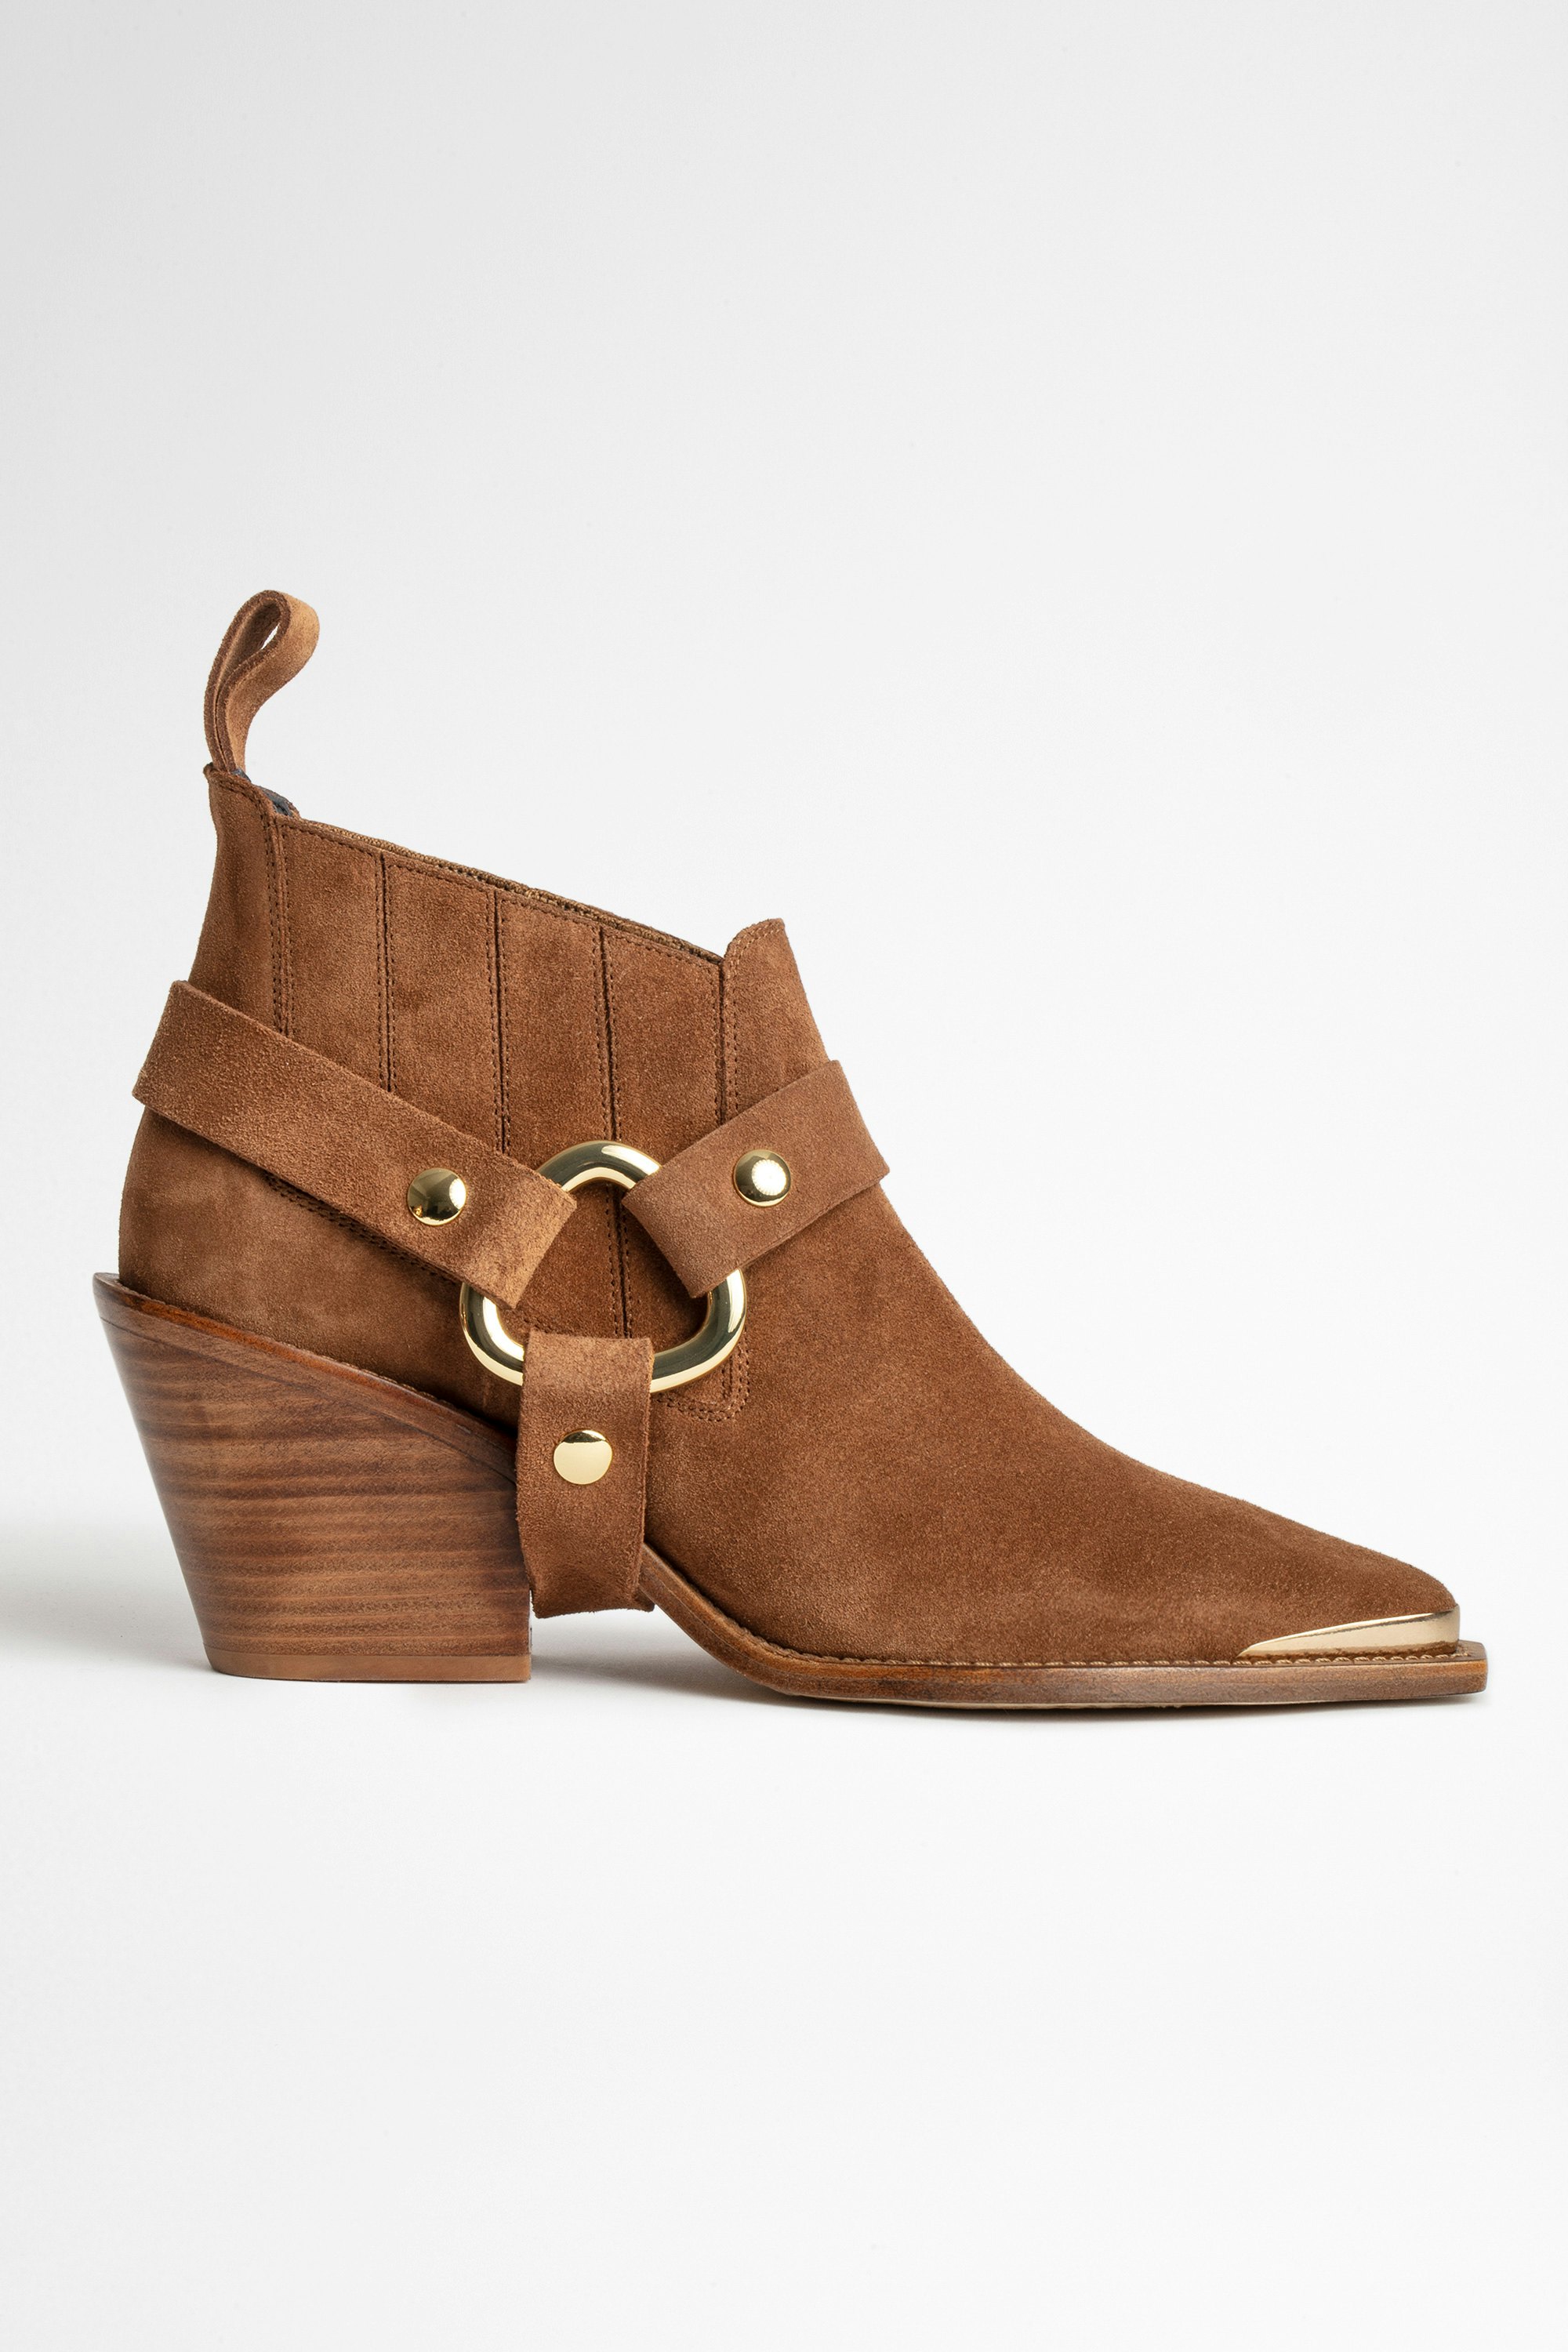 N'Dricks Suede Ankle Boots Women’s brown heeled ankle boots